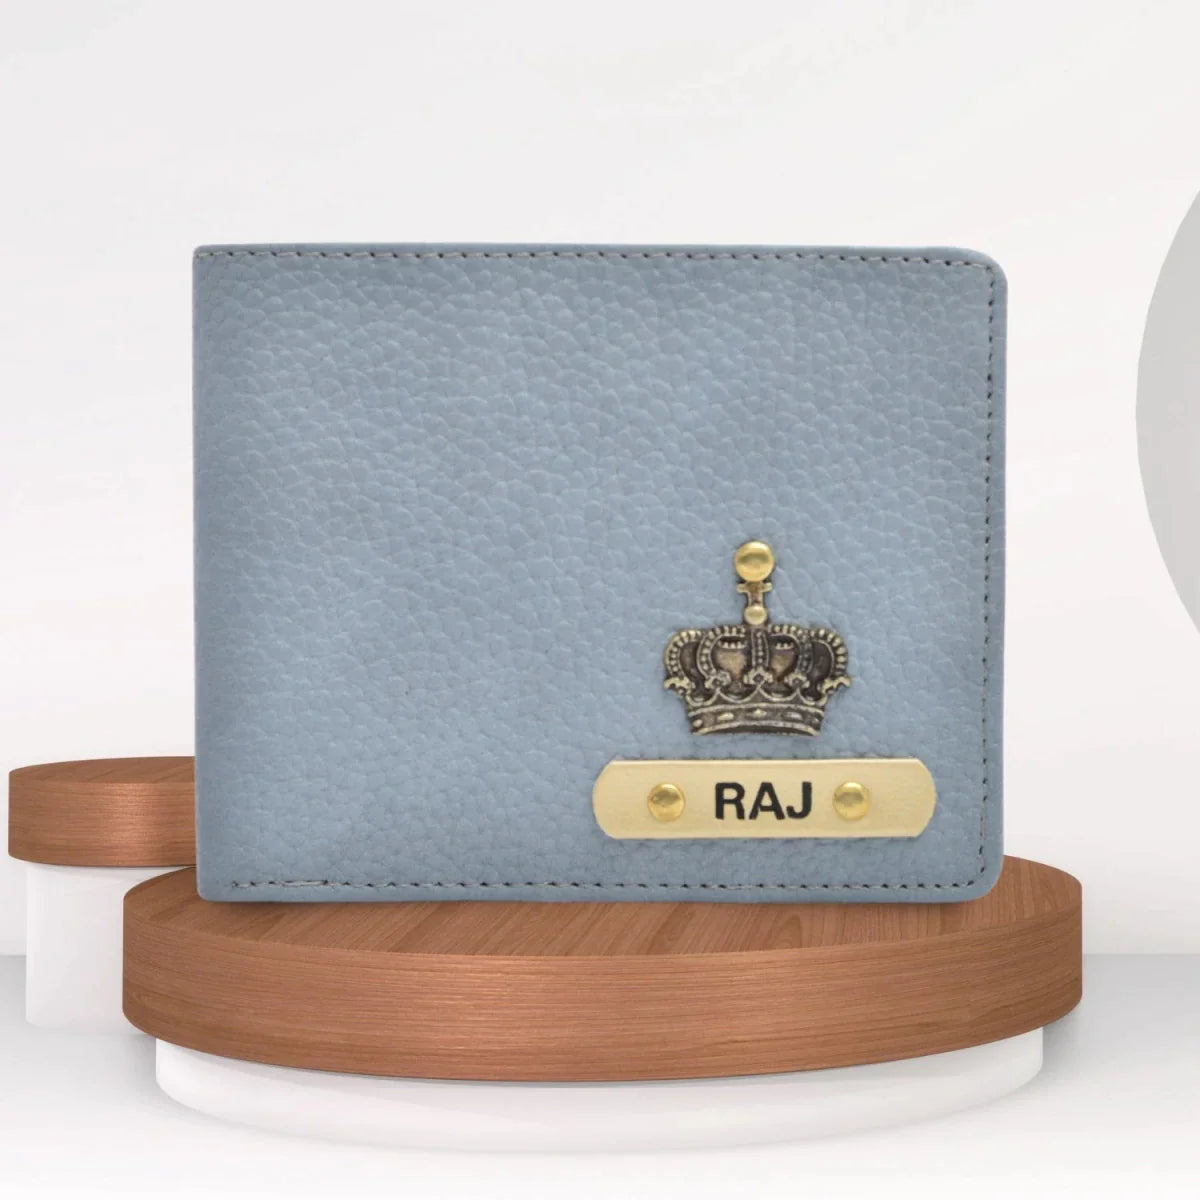 Keep your essentials in one place with our personalized men's wallets. Quick shipping in Coimbatore.